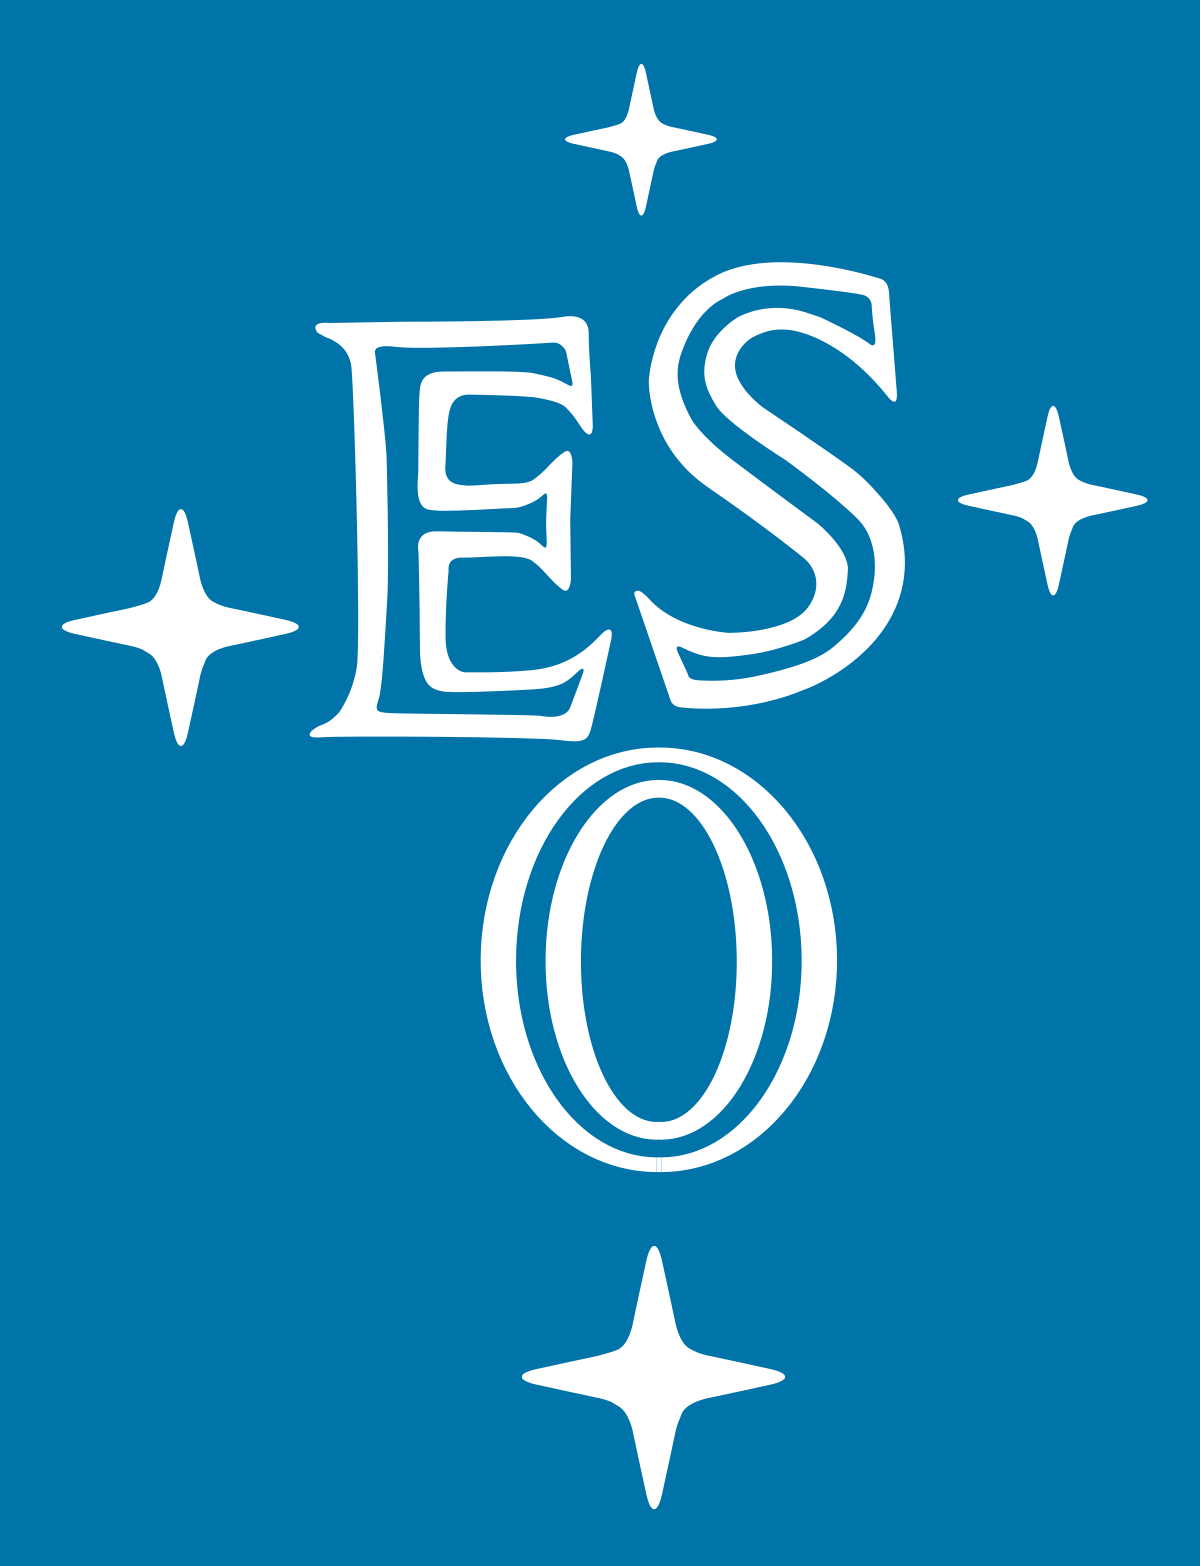 1200px-European_Southern_Observatory_ESO_logo.svg.png